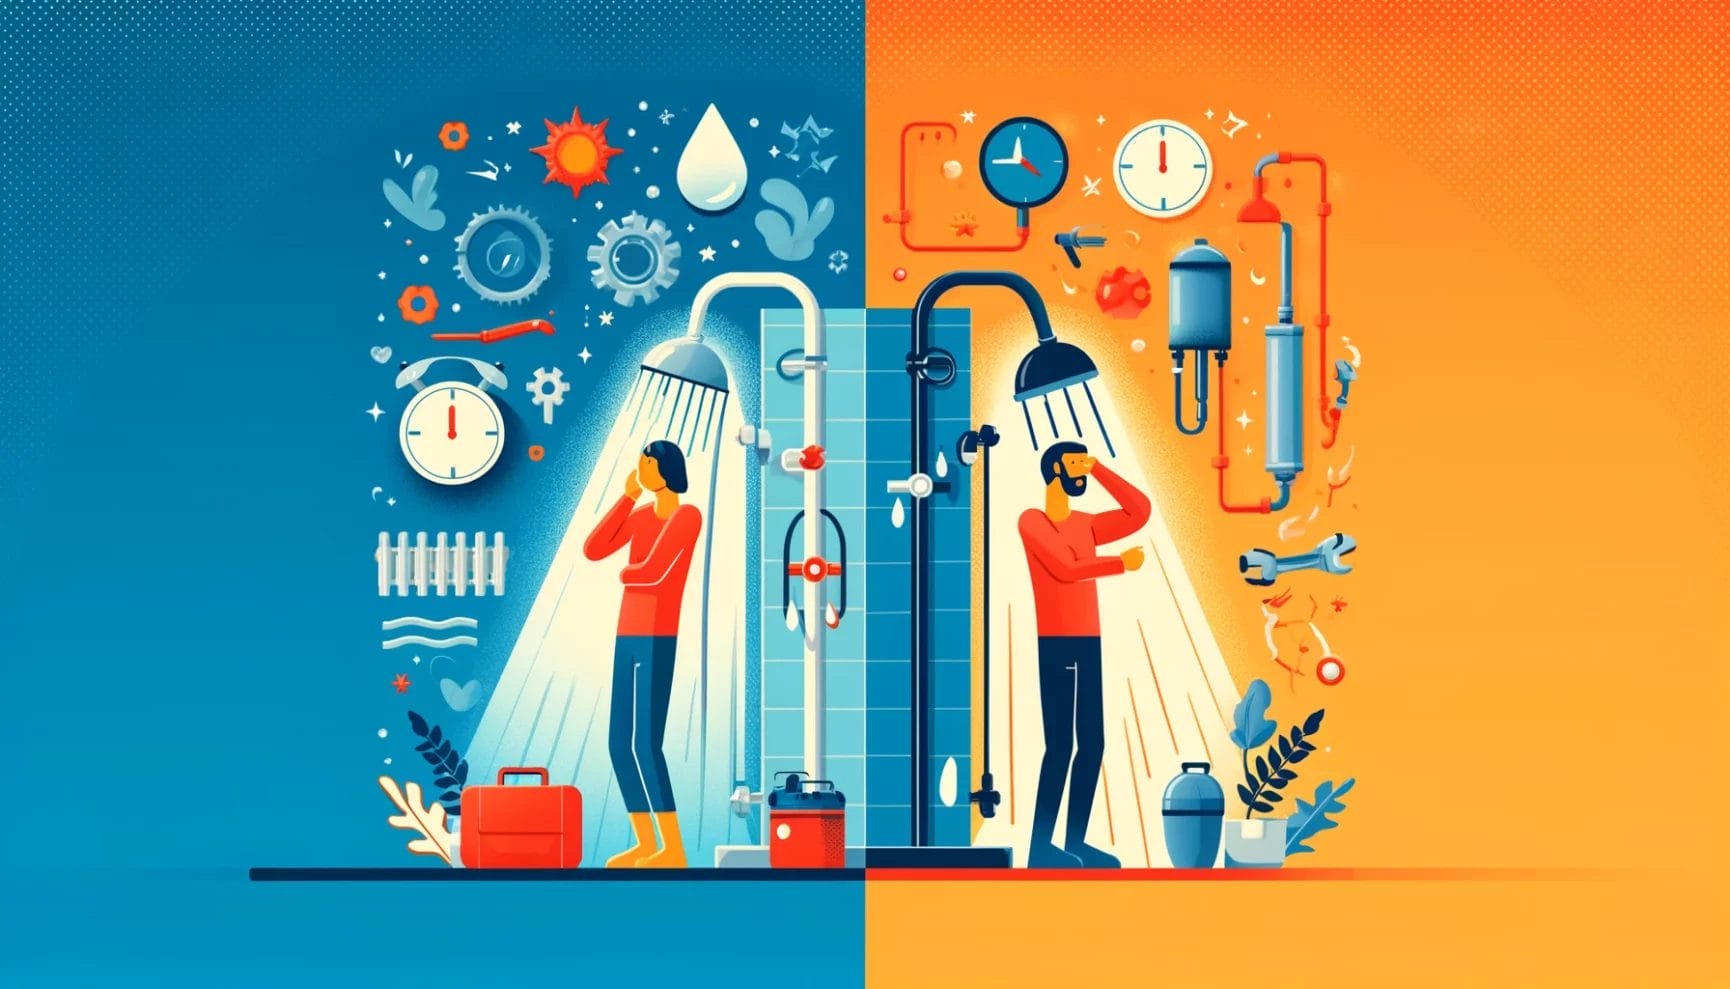 Graphic illustration comparing water usage during a shower, with one side showing a wasteful and lengthy shower versus the other depicting a conservation-minded, shorter shower time.